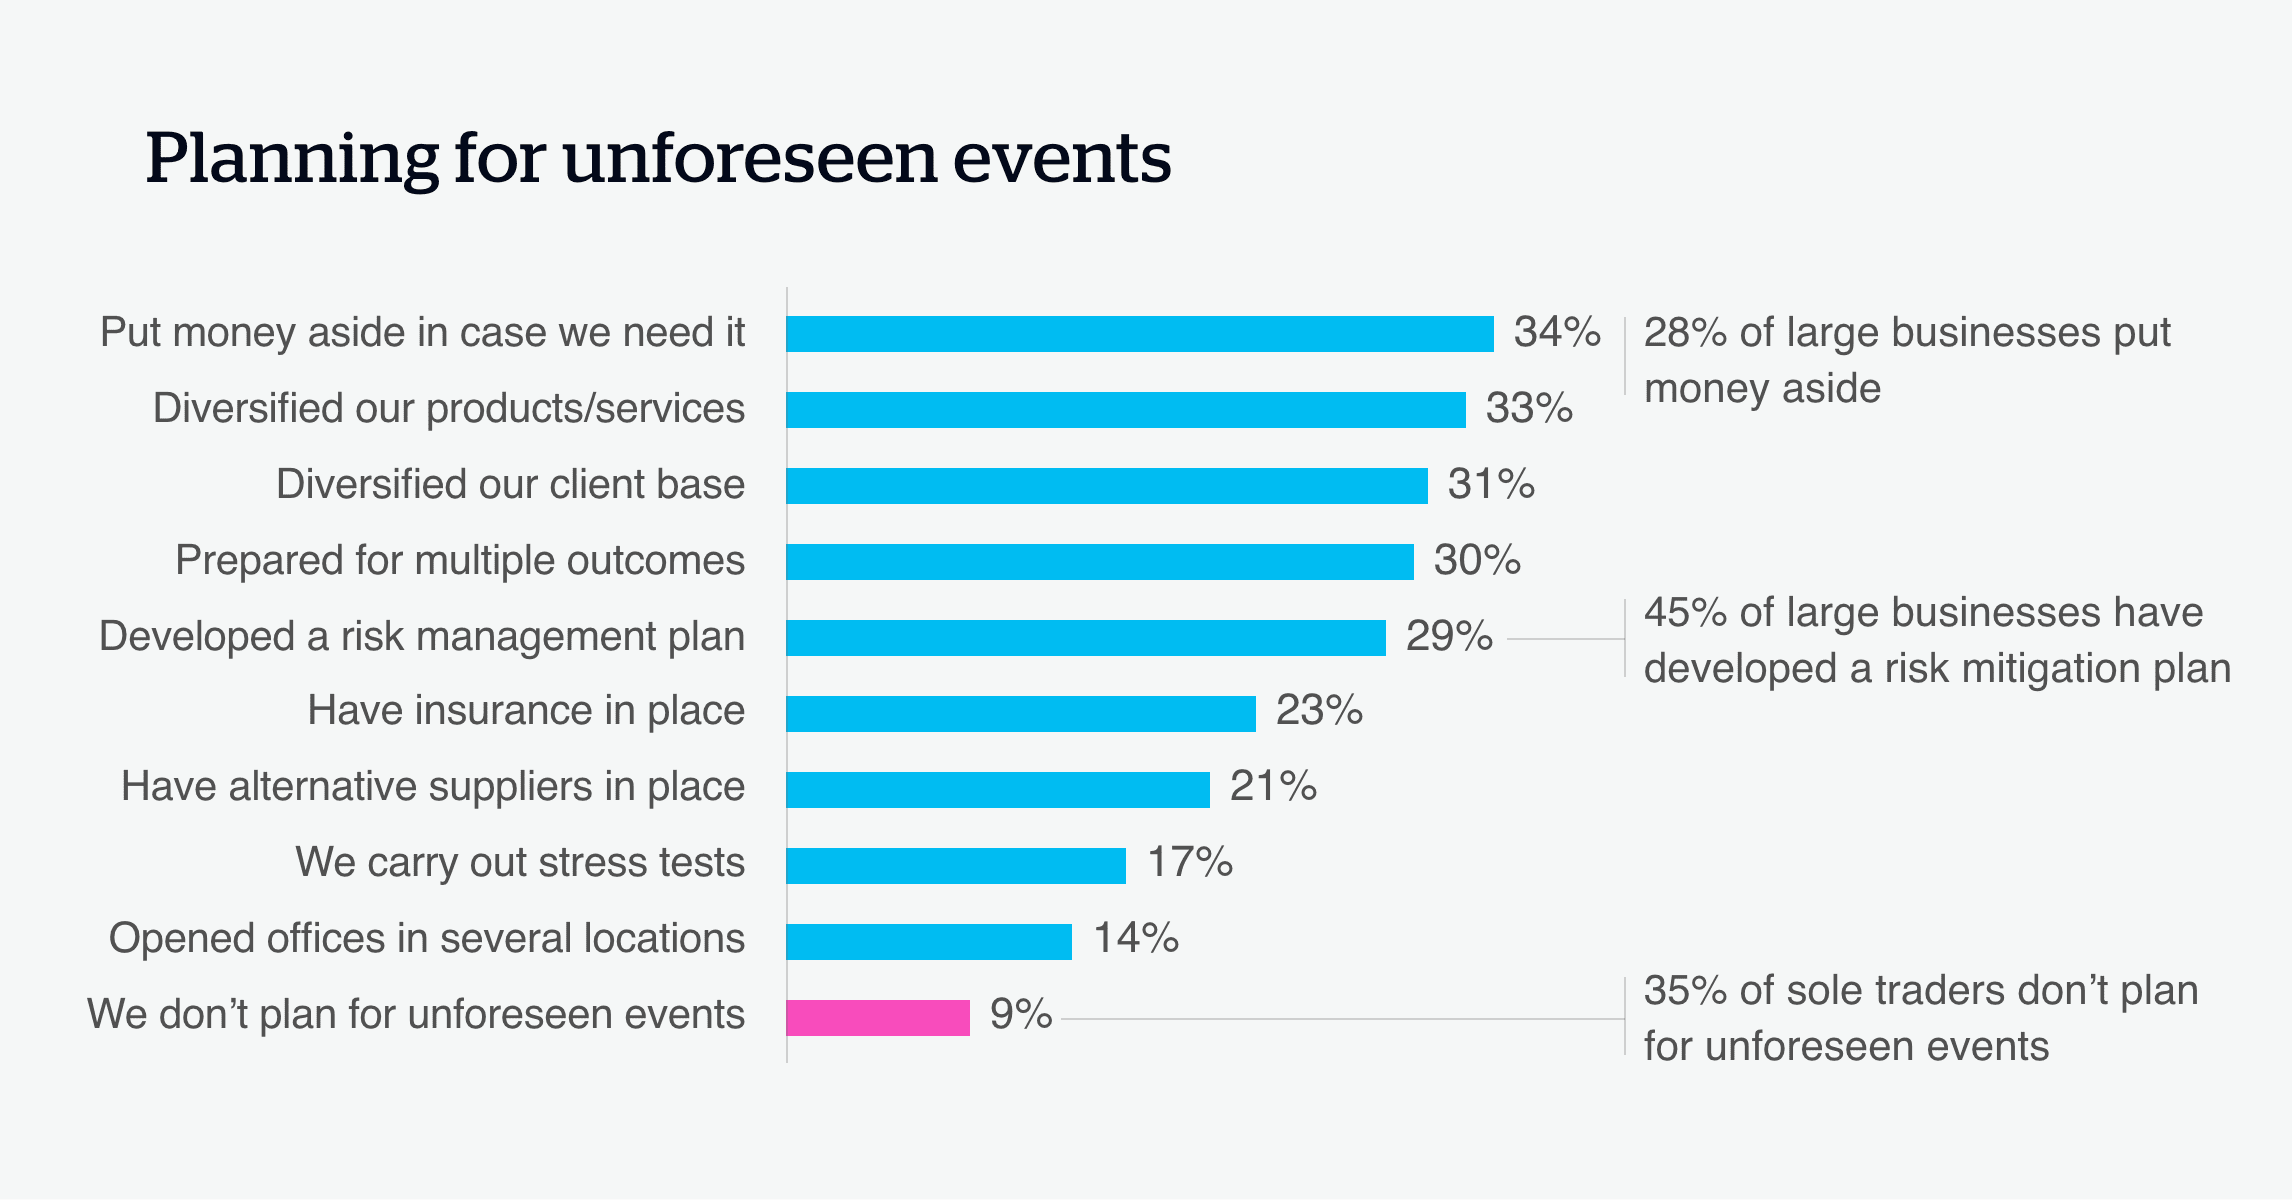 Source: The QBE Unpredictability Index - 2019 'How does your business plan for unforeseen events?'